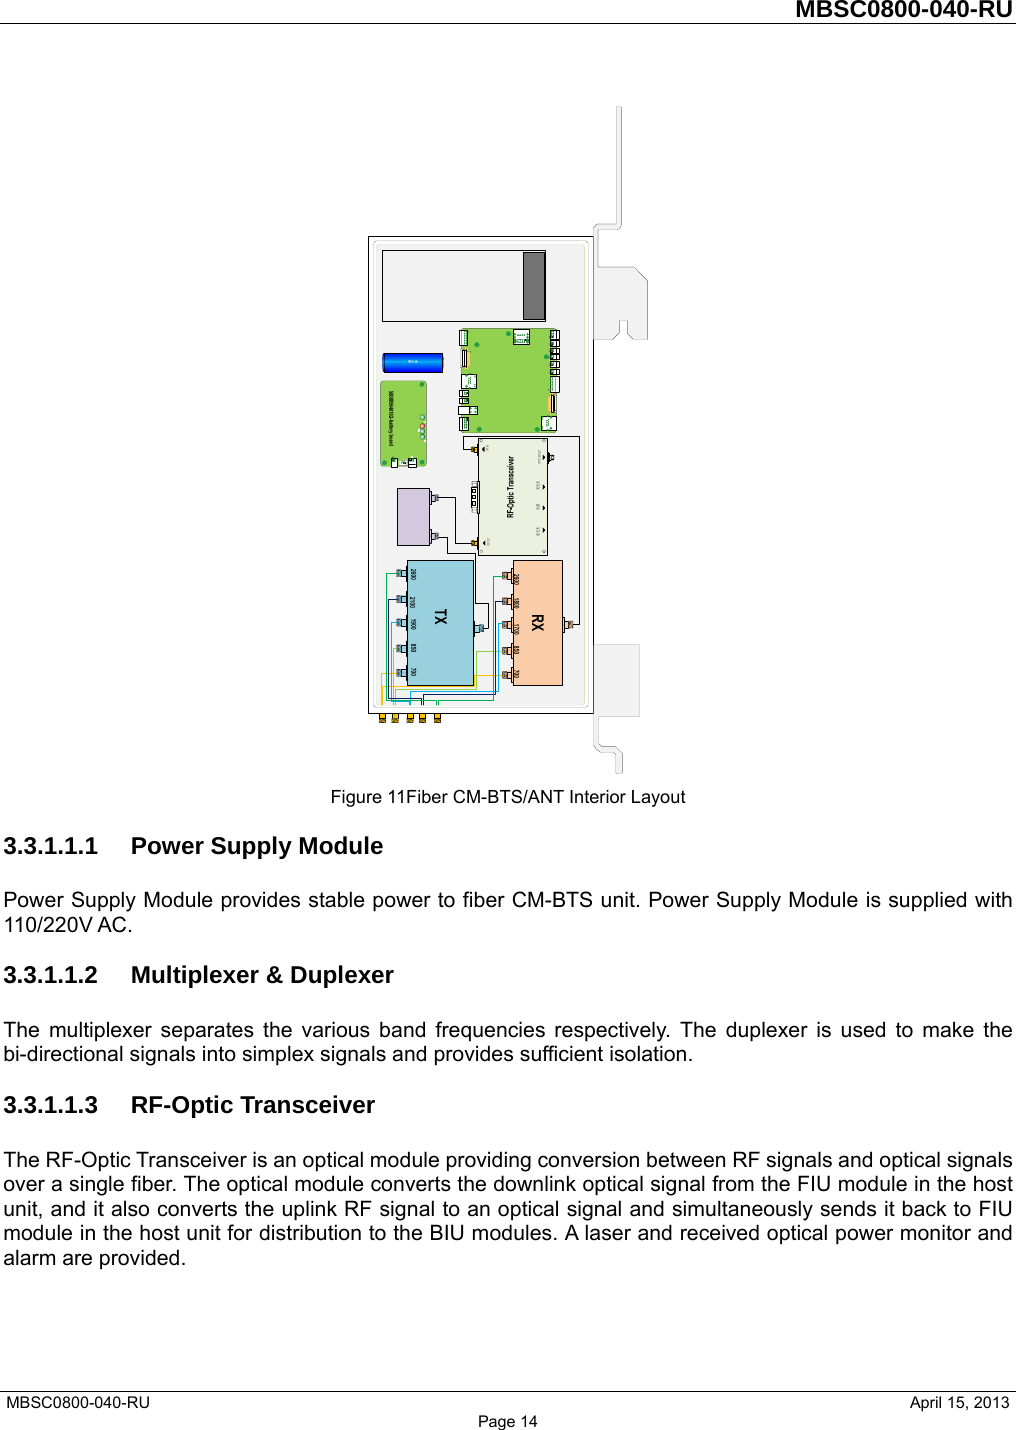         MBSC0800-040-RU   MBSC0800-040-RU                                                   April 15, 2013 Page 14 A Figure 11Fiber CM-BTS/ANT Interior Layout 3.3.1.1.1 Power Supply Module Power Supply Module provides stable power to fiber CM-BTS unit. Power Supply Module is supplied with 110/220V AC. 3.3.1.1.2 Multiplexer &amp; Duplexer The multiplexer separates the various band frequencies respectively. The duplexer is used to make the bi-directional signals into simplex signals and provides sufficient isolation. 3.3.1.1.3 RF-Optic Transceiver The RF-Optic Transceiver is an optical module providing conversion between RF signals and optical signals over a single fiber. The optical module converts the downlink optical signal from the FIU module in the host unit, and it also converts the uplink RF signal to an optical signal and simultaneously sends it back to FIU module in the host unit for distribution to the BIU modules. A laser and received optical power monitor and alarm are provided.  